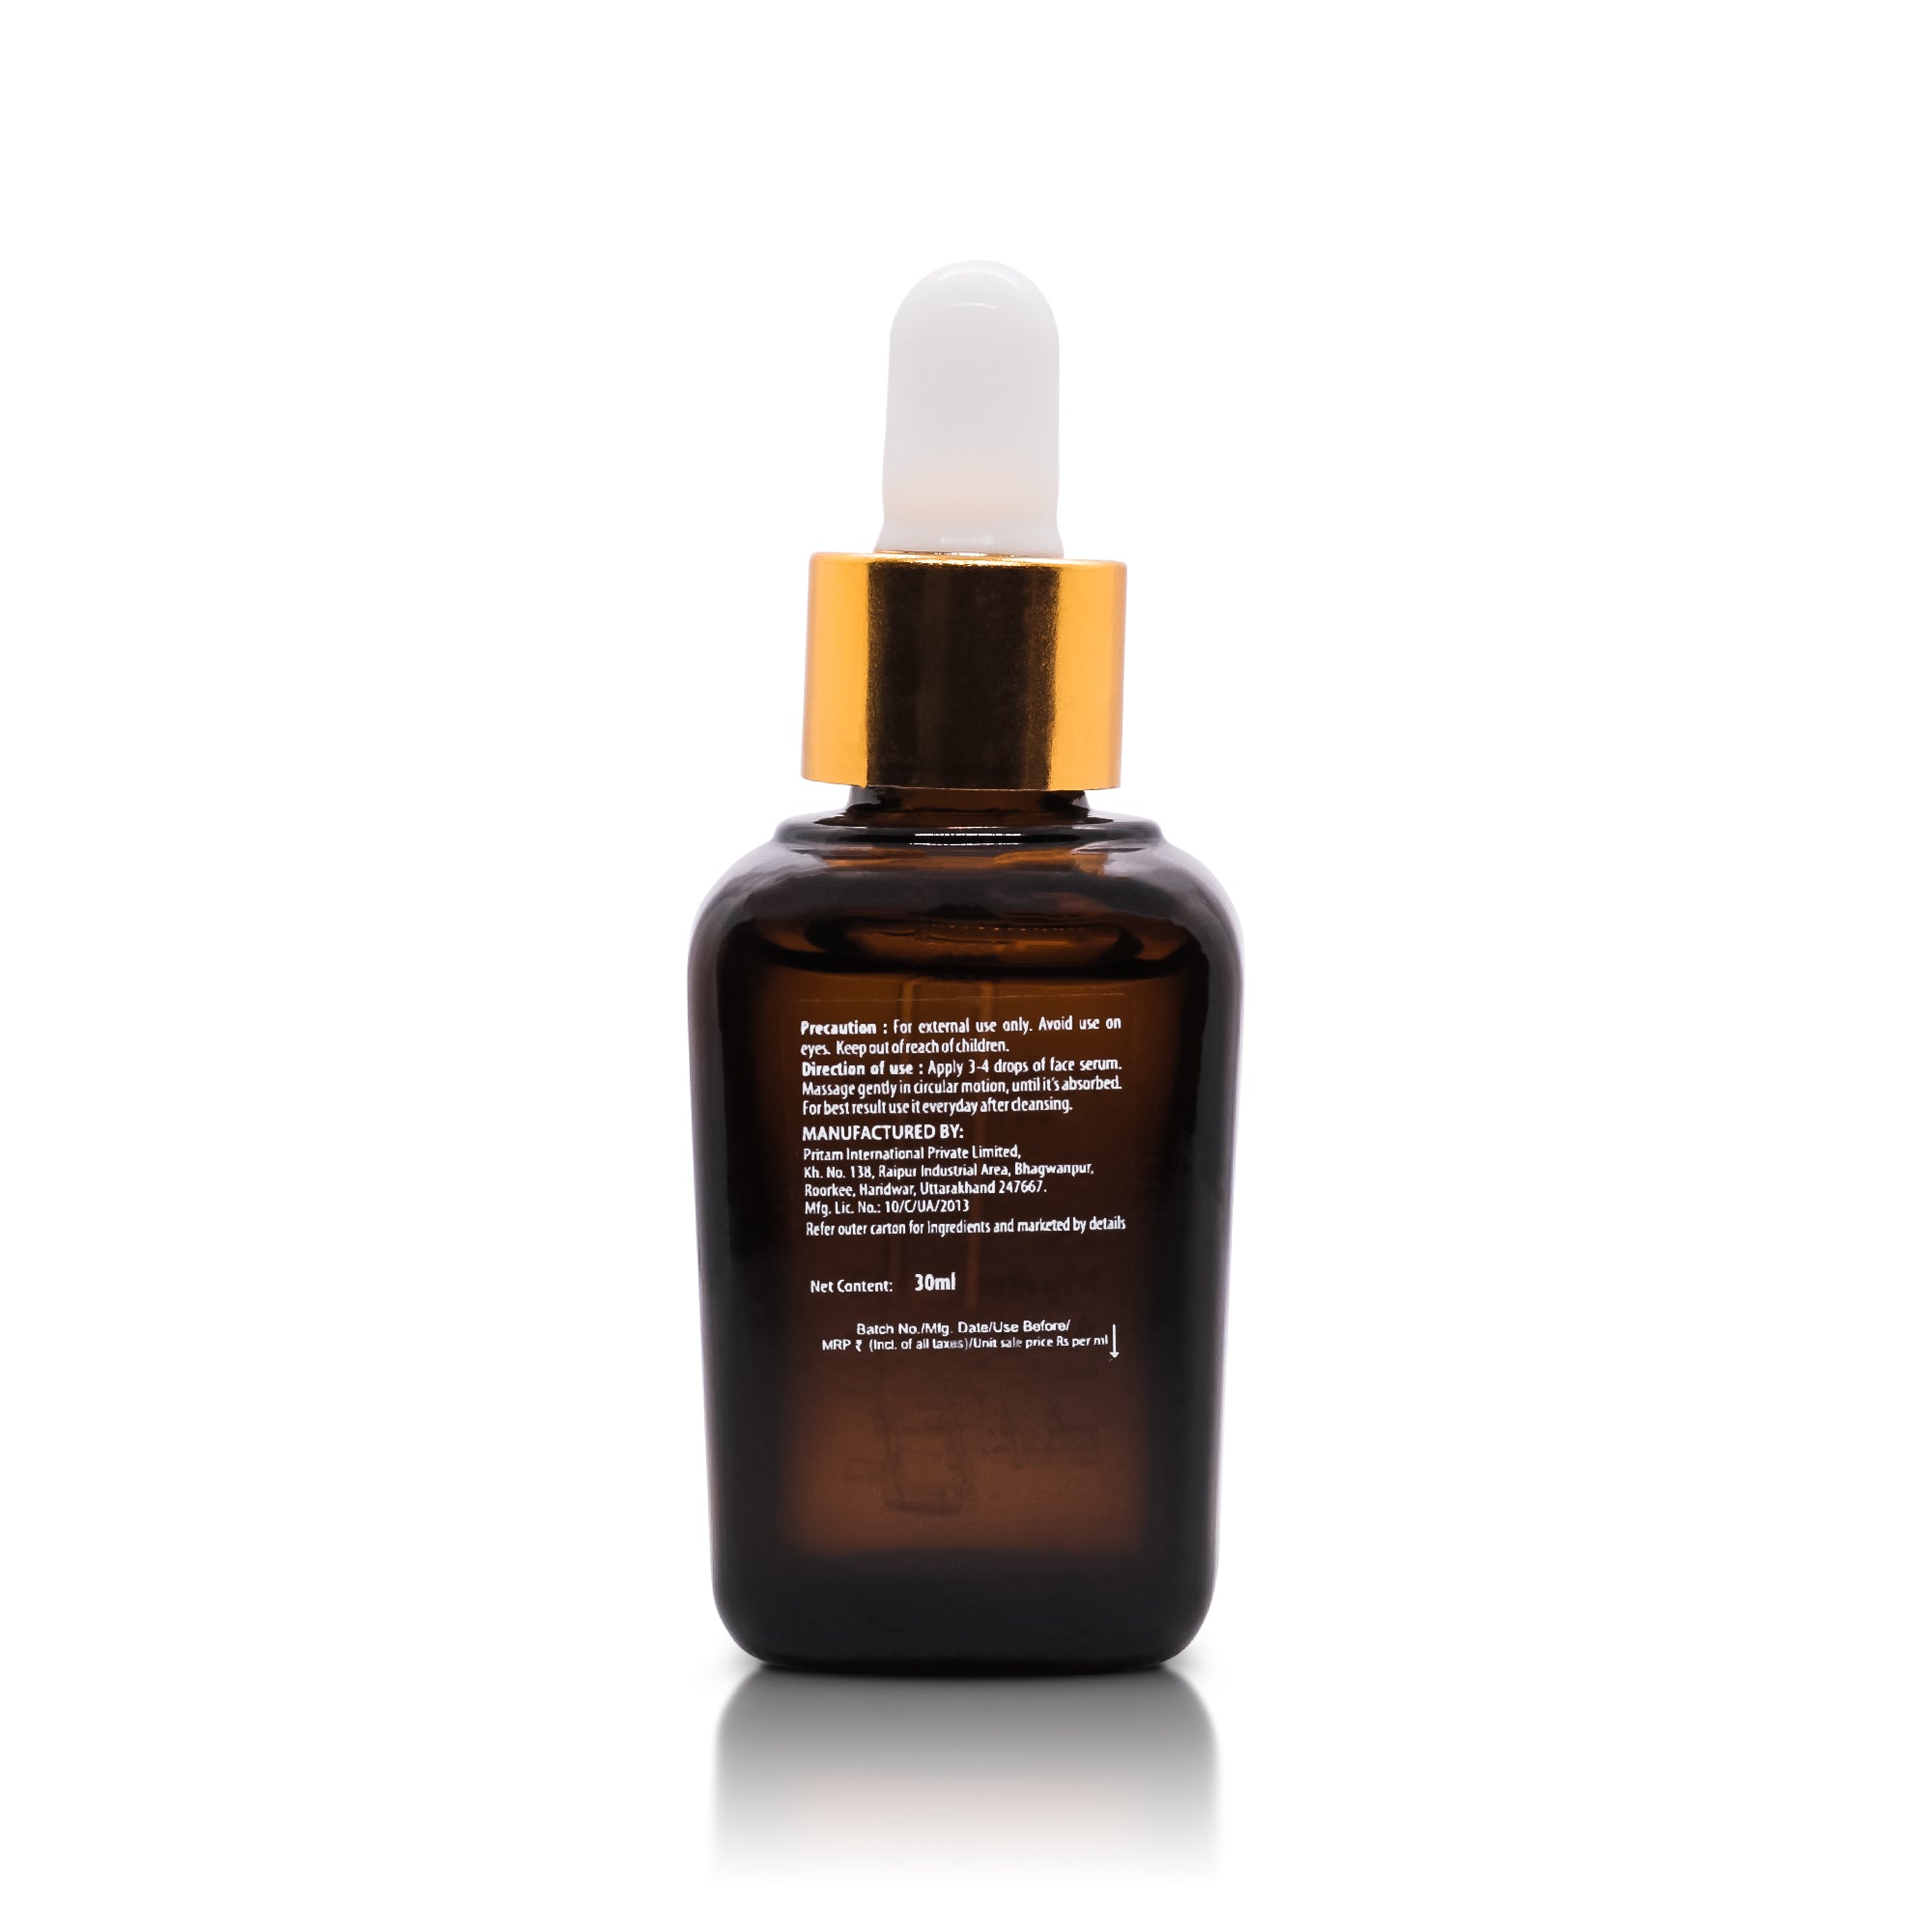 2% Hyaluronic Acid Face Serum with Vitamin B5, 30ml